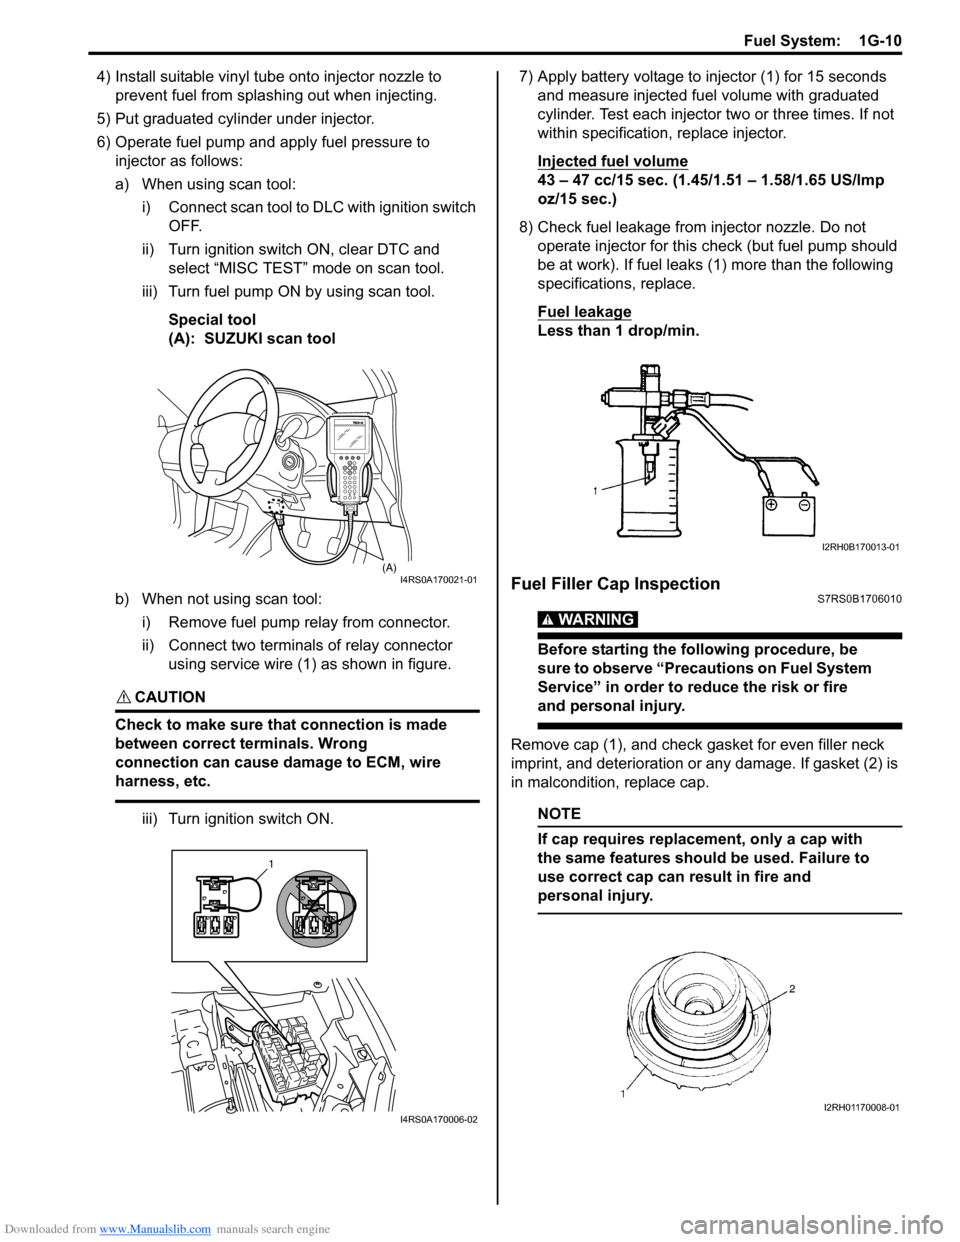 SUZUKI SWIFT 2008 2.G Service Workshop Manual Downloaded from www.Manualslib.com manuals search engine Fuel System:  1G-10
4) Install suitable vinyl tube onto injector nozzle to 
prevent fuel from splashing out when injecting.
5) Put graduated cy